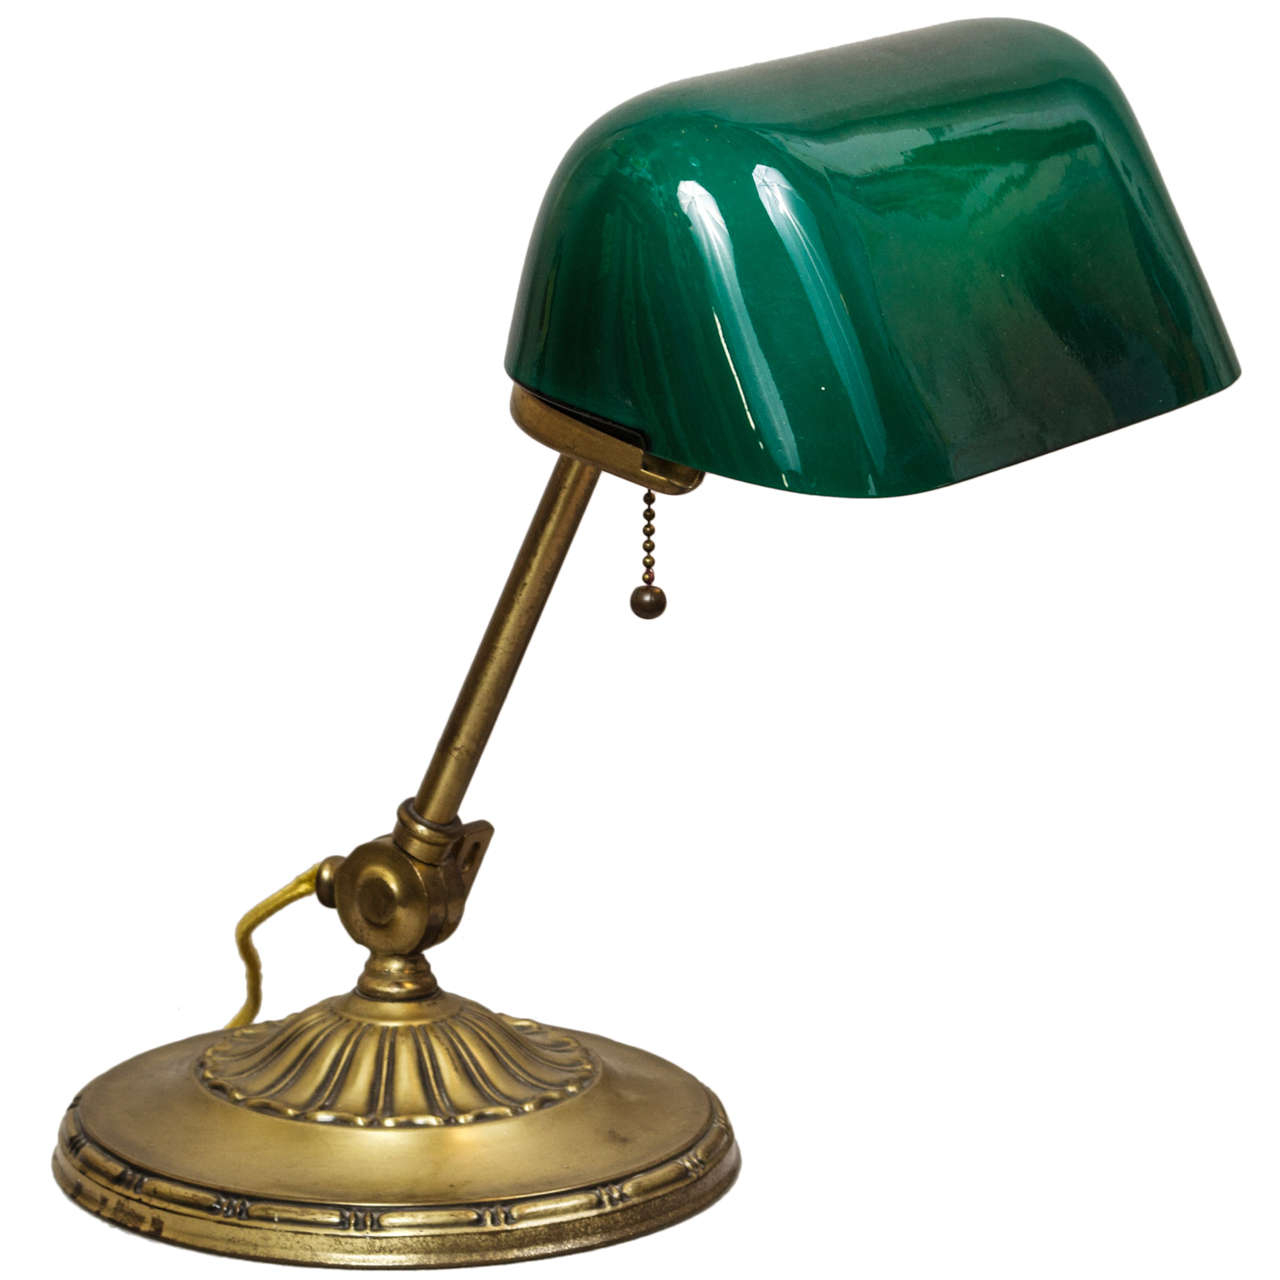 Design Classics: The History Of The Banker's Lamp